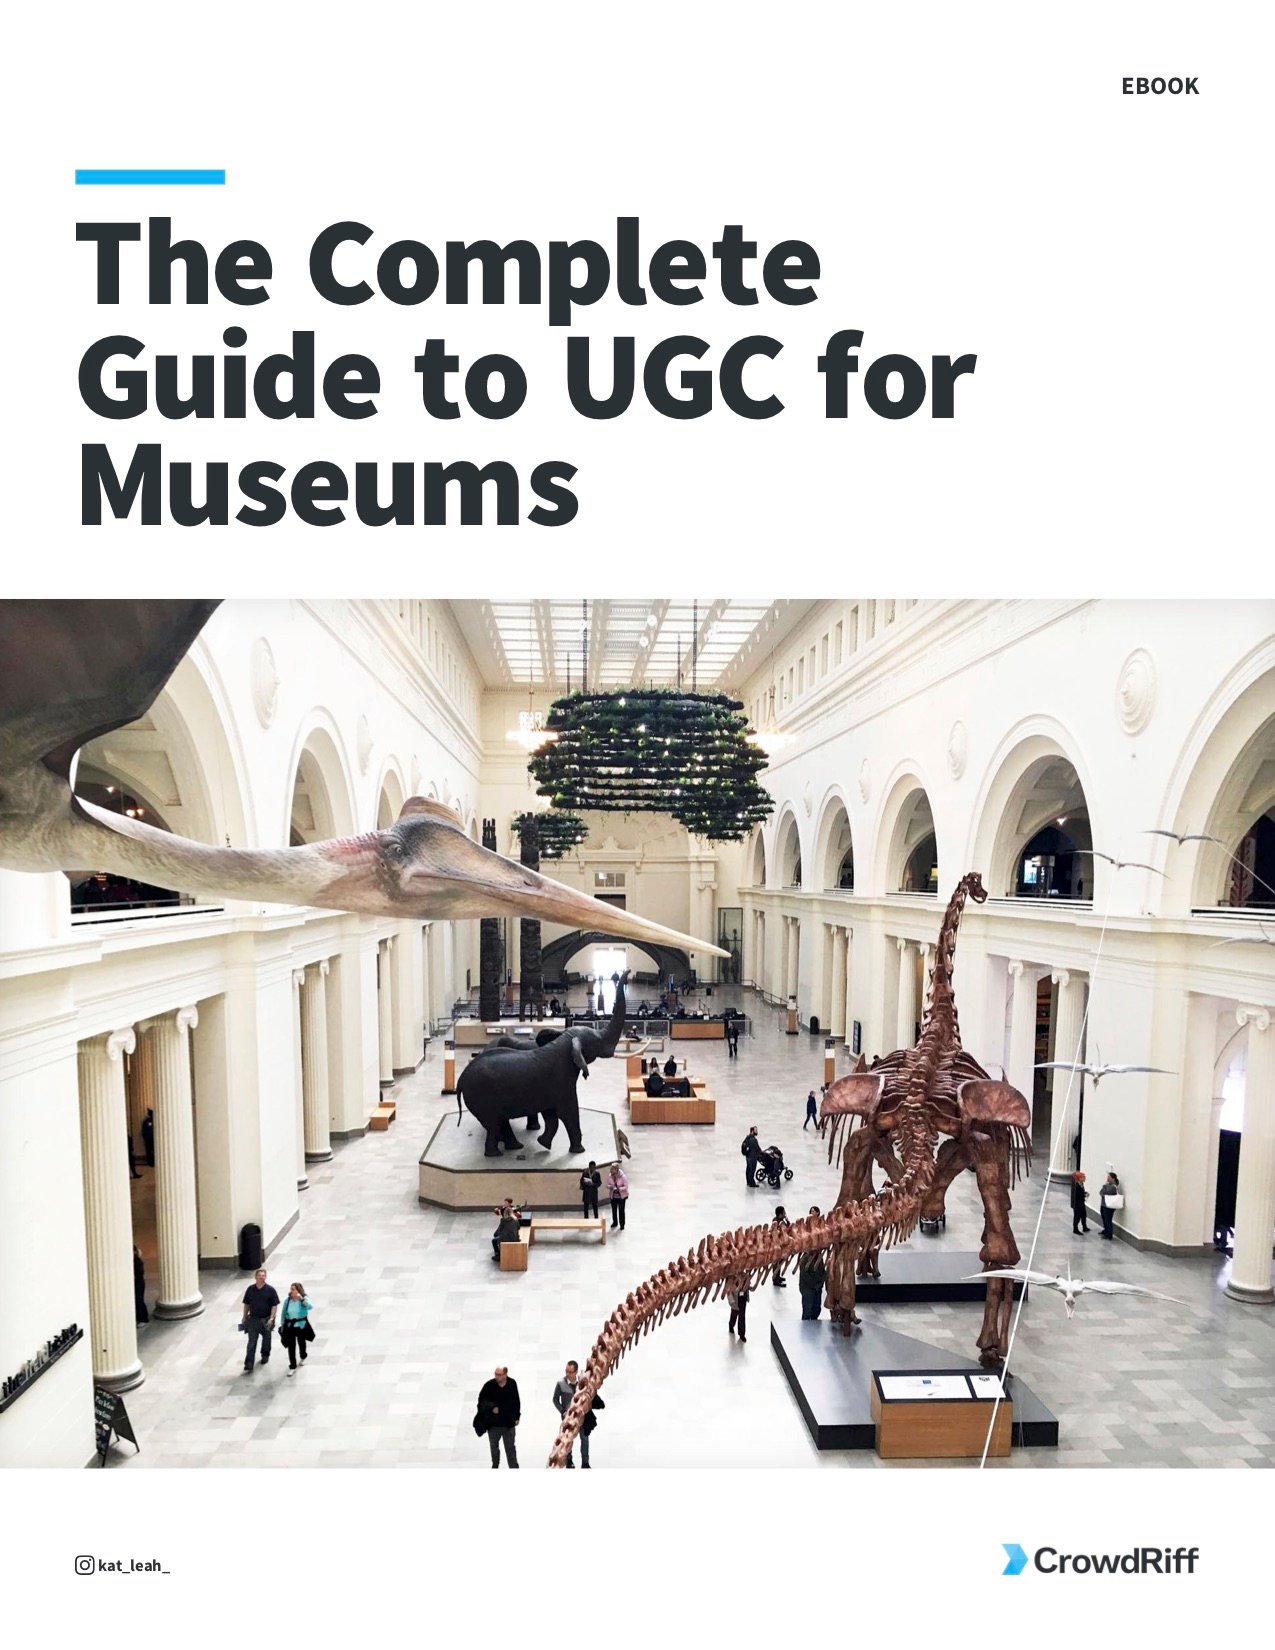 The Complete Guide to UGC for Museums